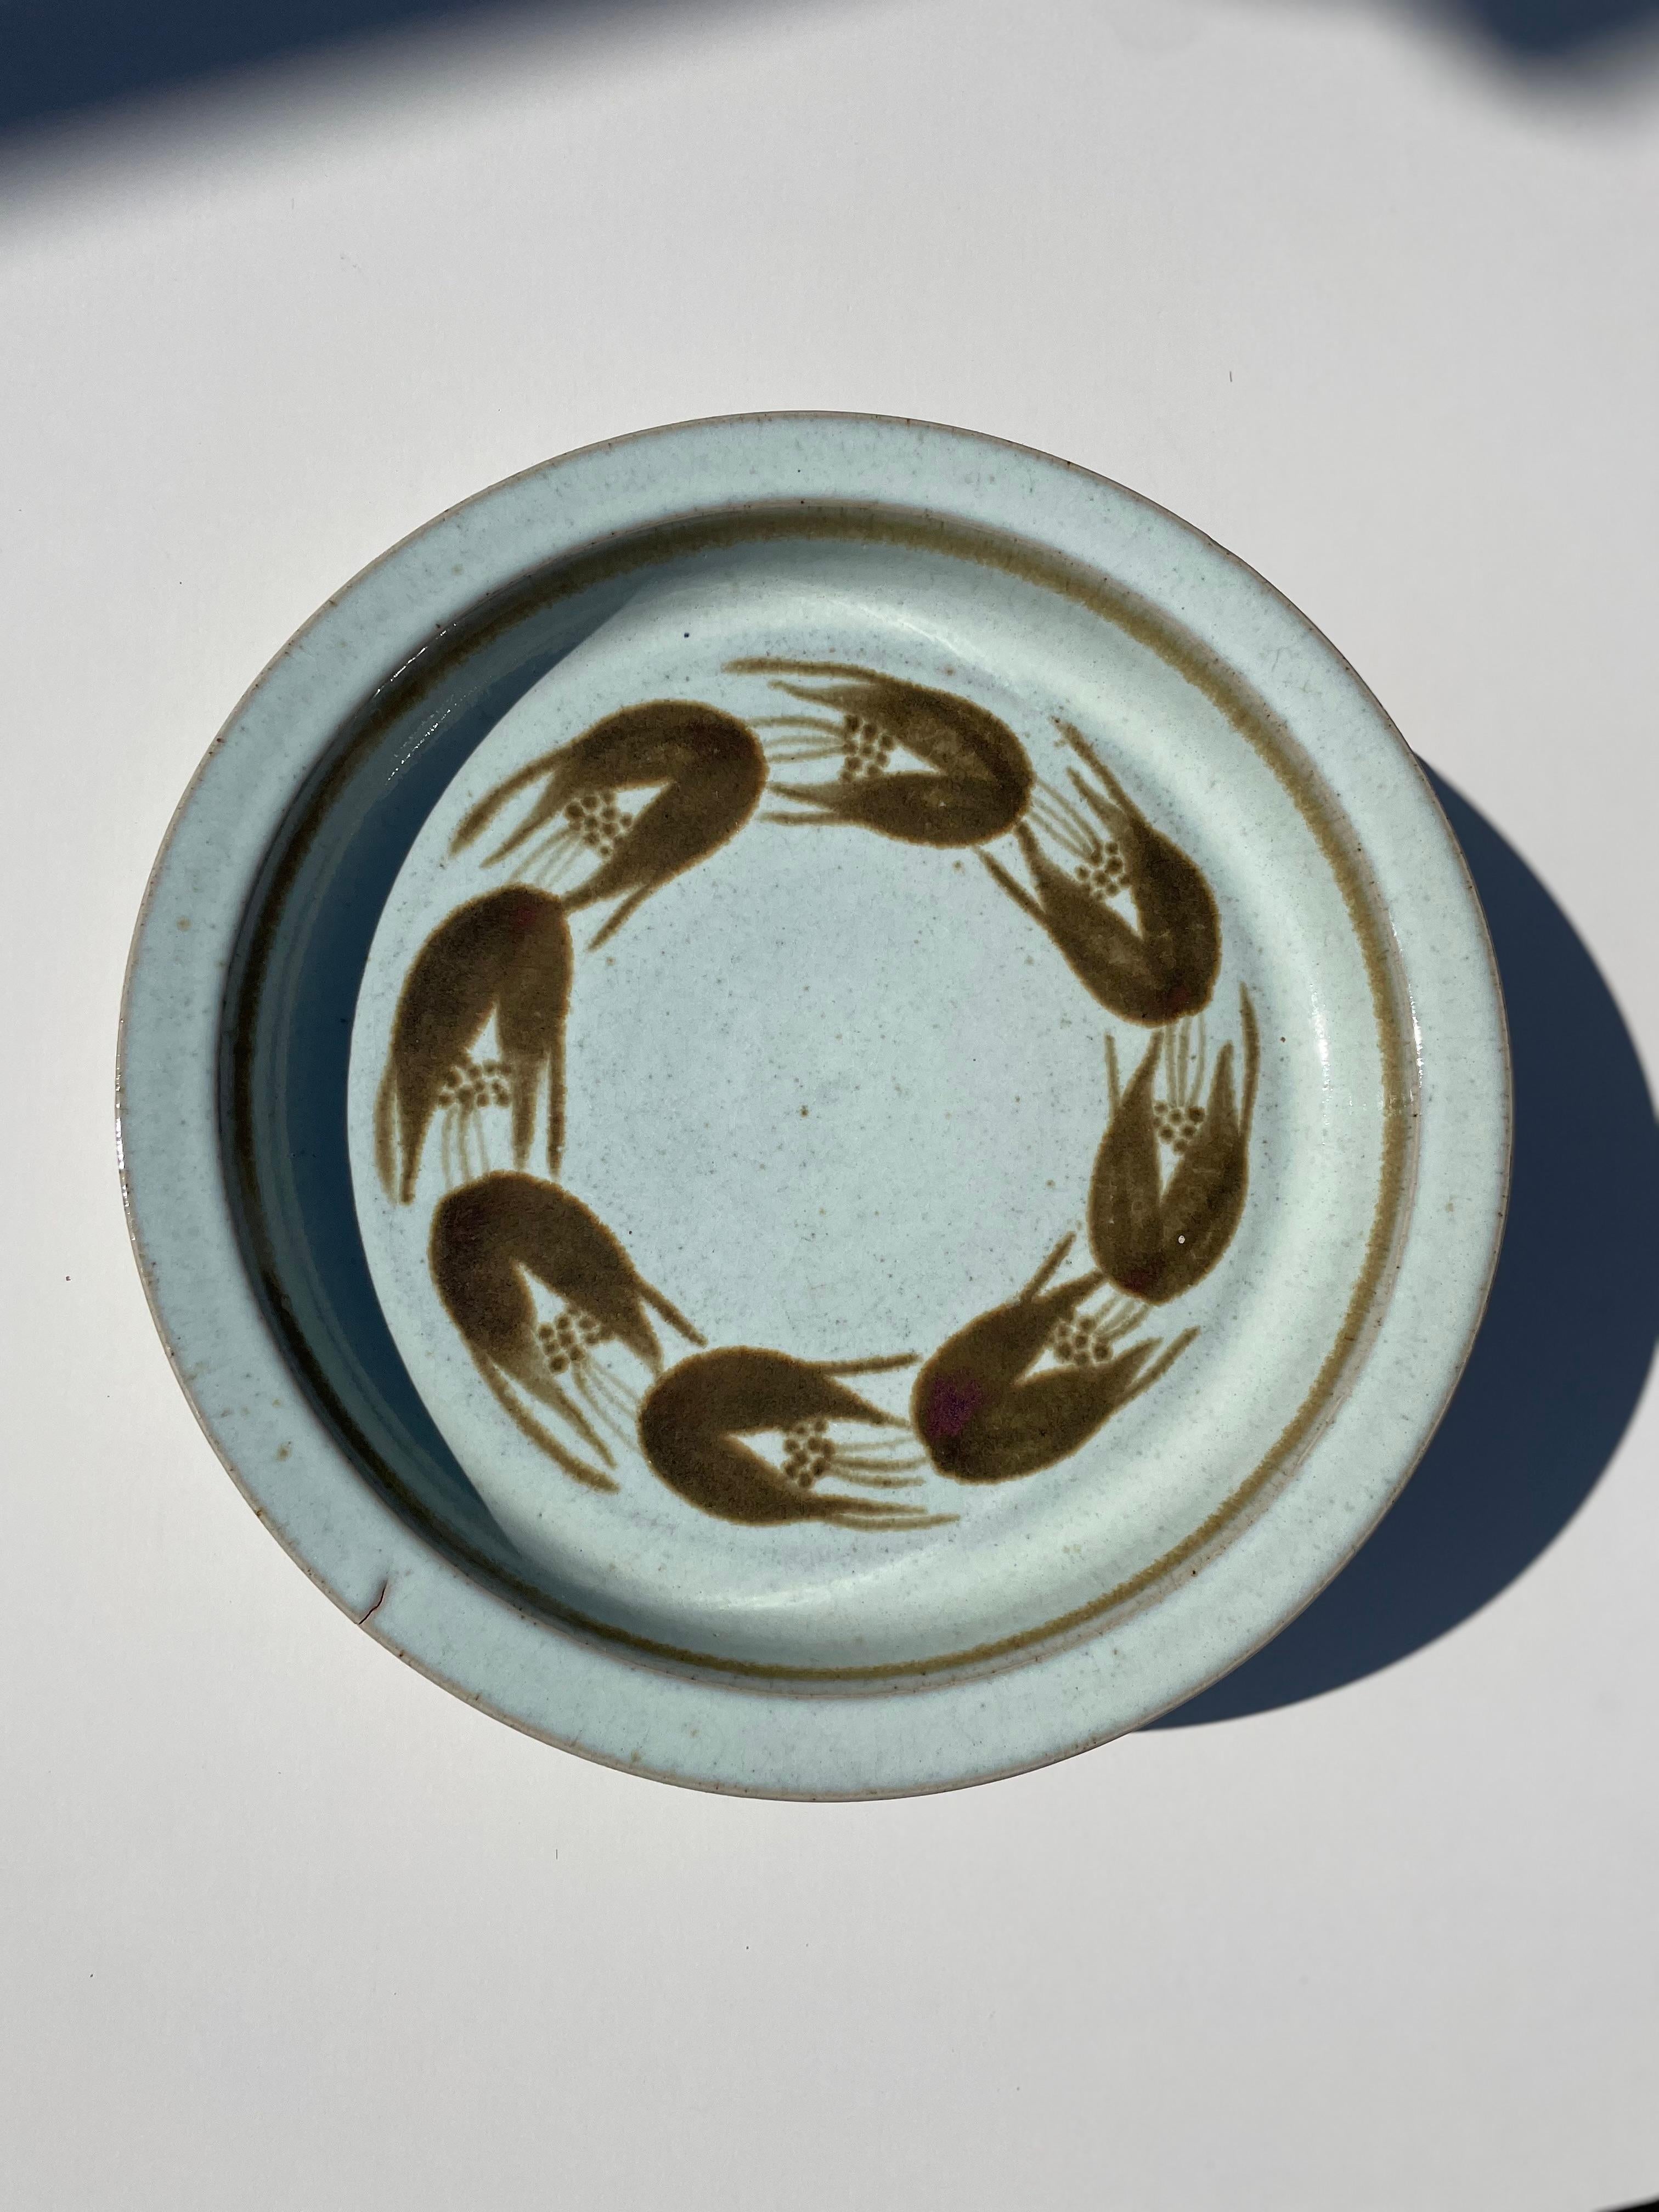 Handmade Danish modern round centerpiece with light sky blue glaze and large stylized organic caramel colored decorations in a circle. Manufactured by Eslau in 1987. Signed and dated under base. Small line from production - see photos. Beautiful